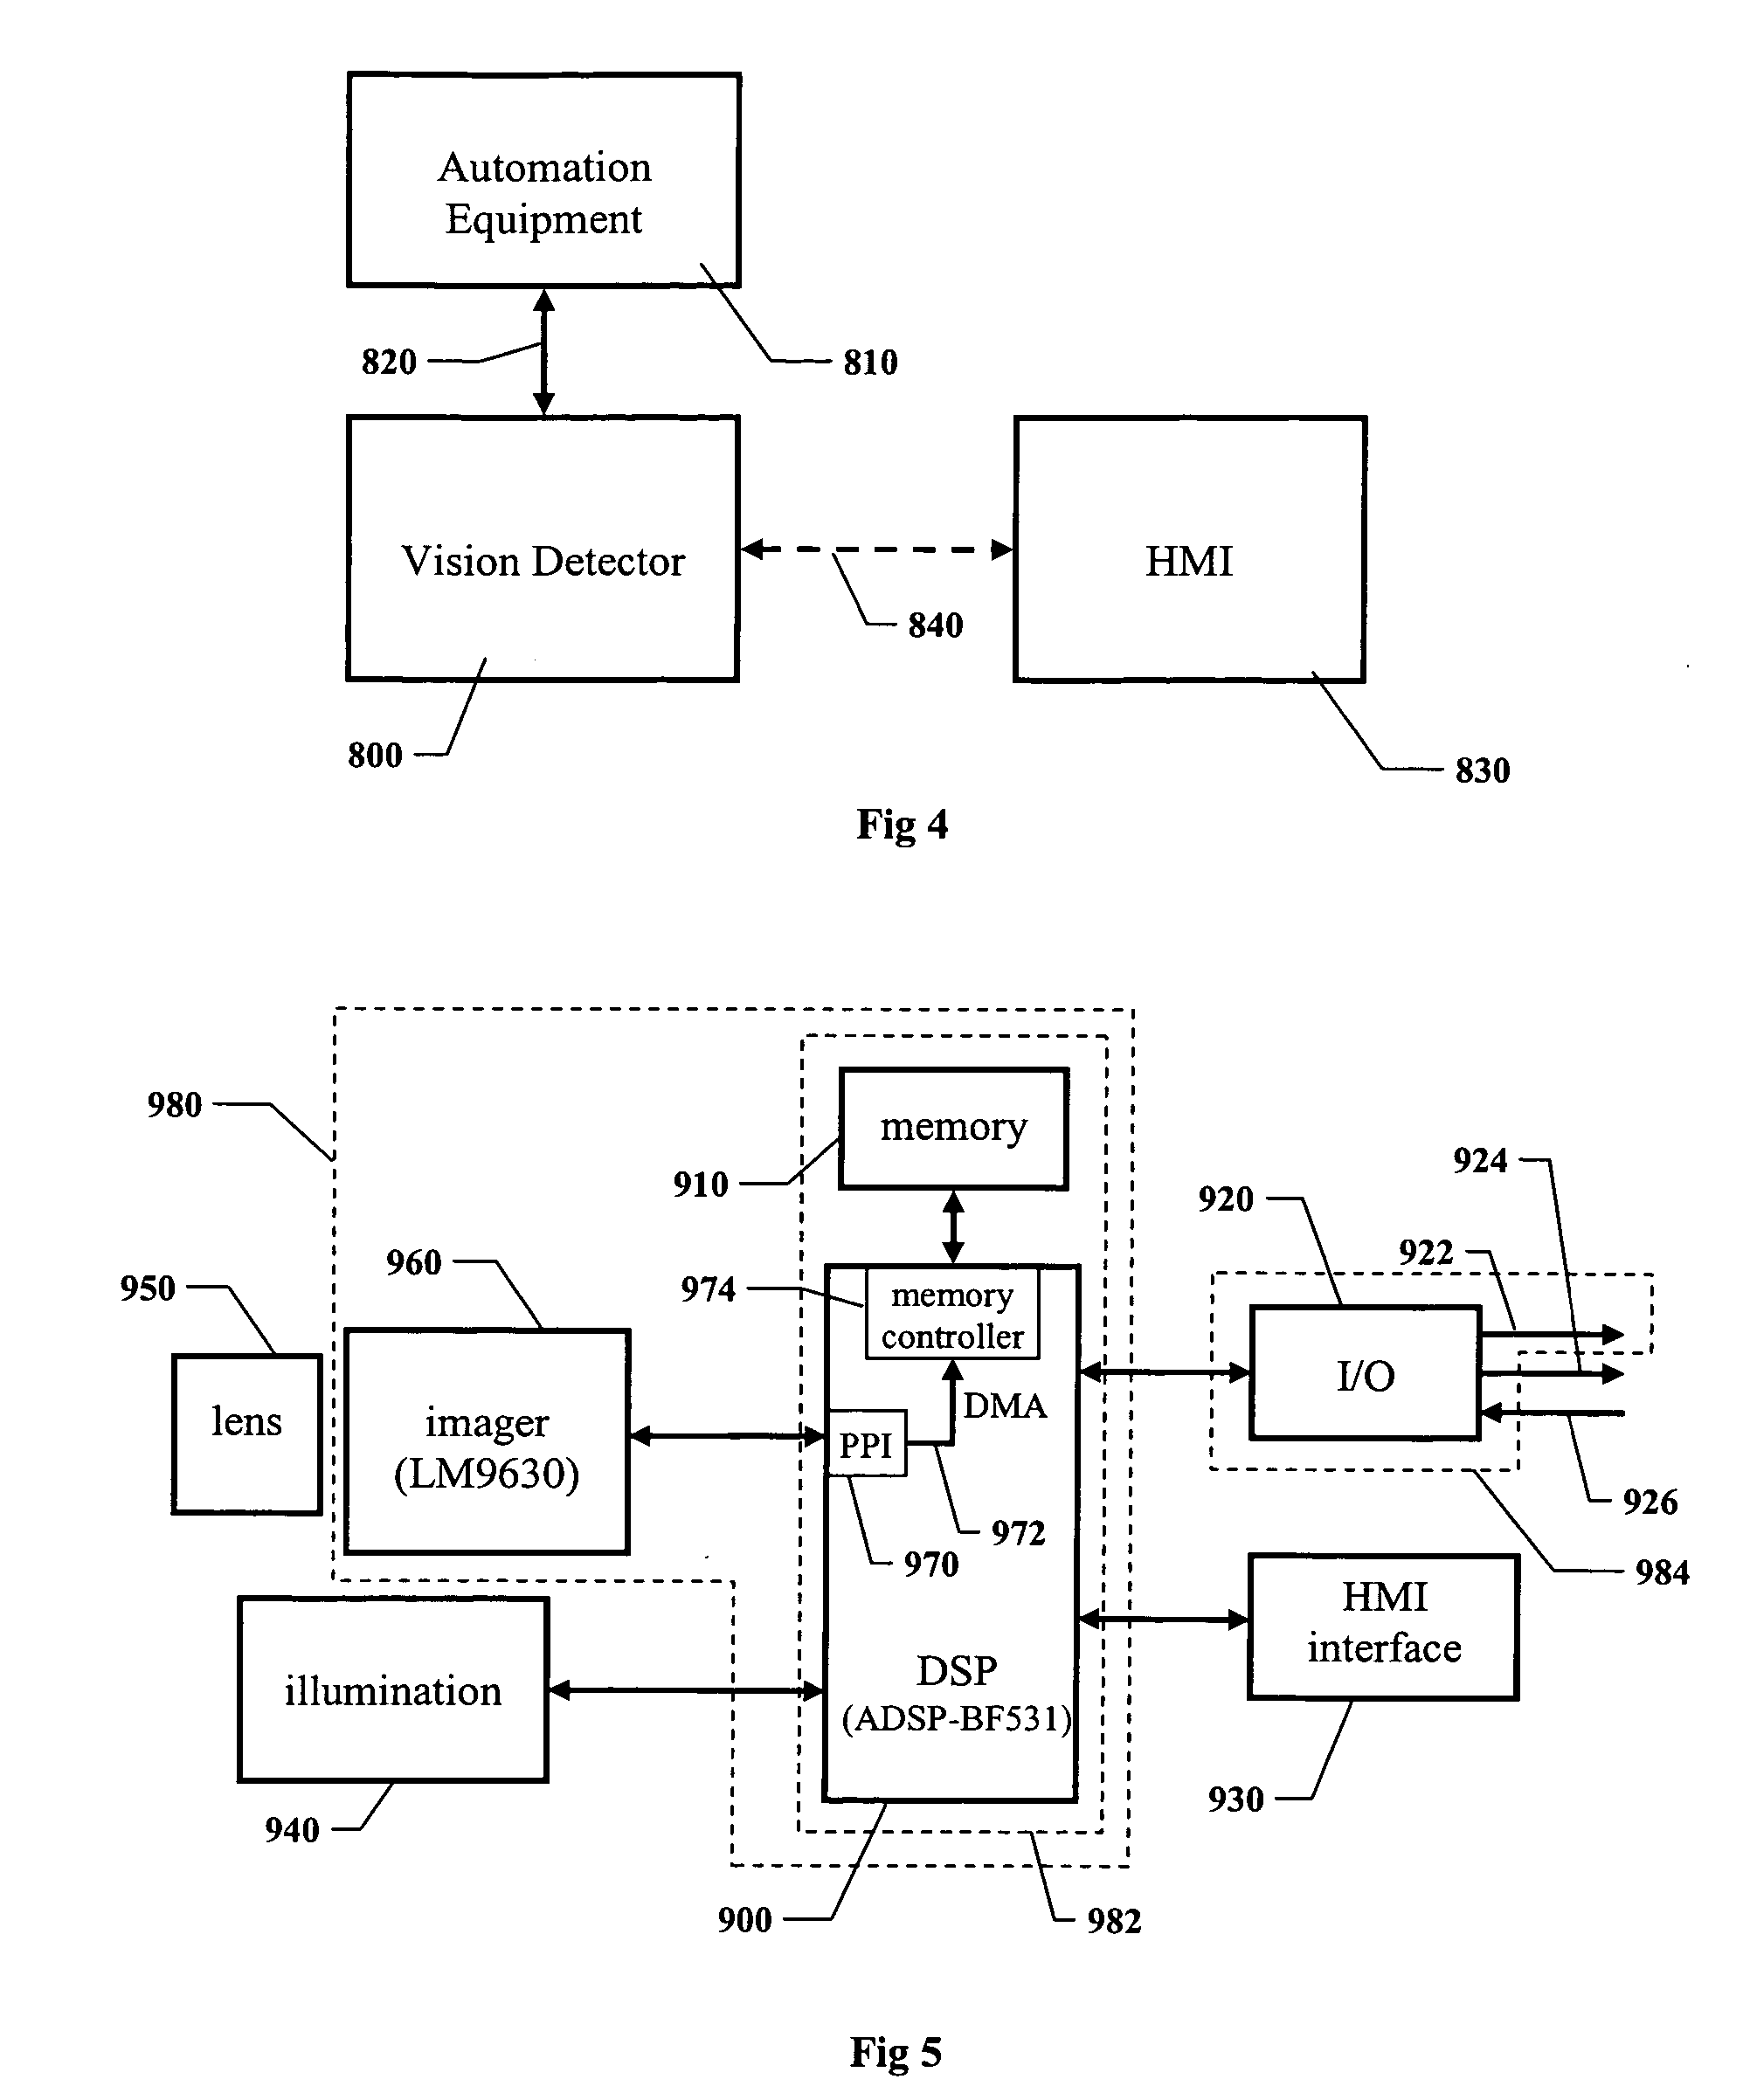 Method and apparatus for configuring and testing a machine vision detector